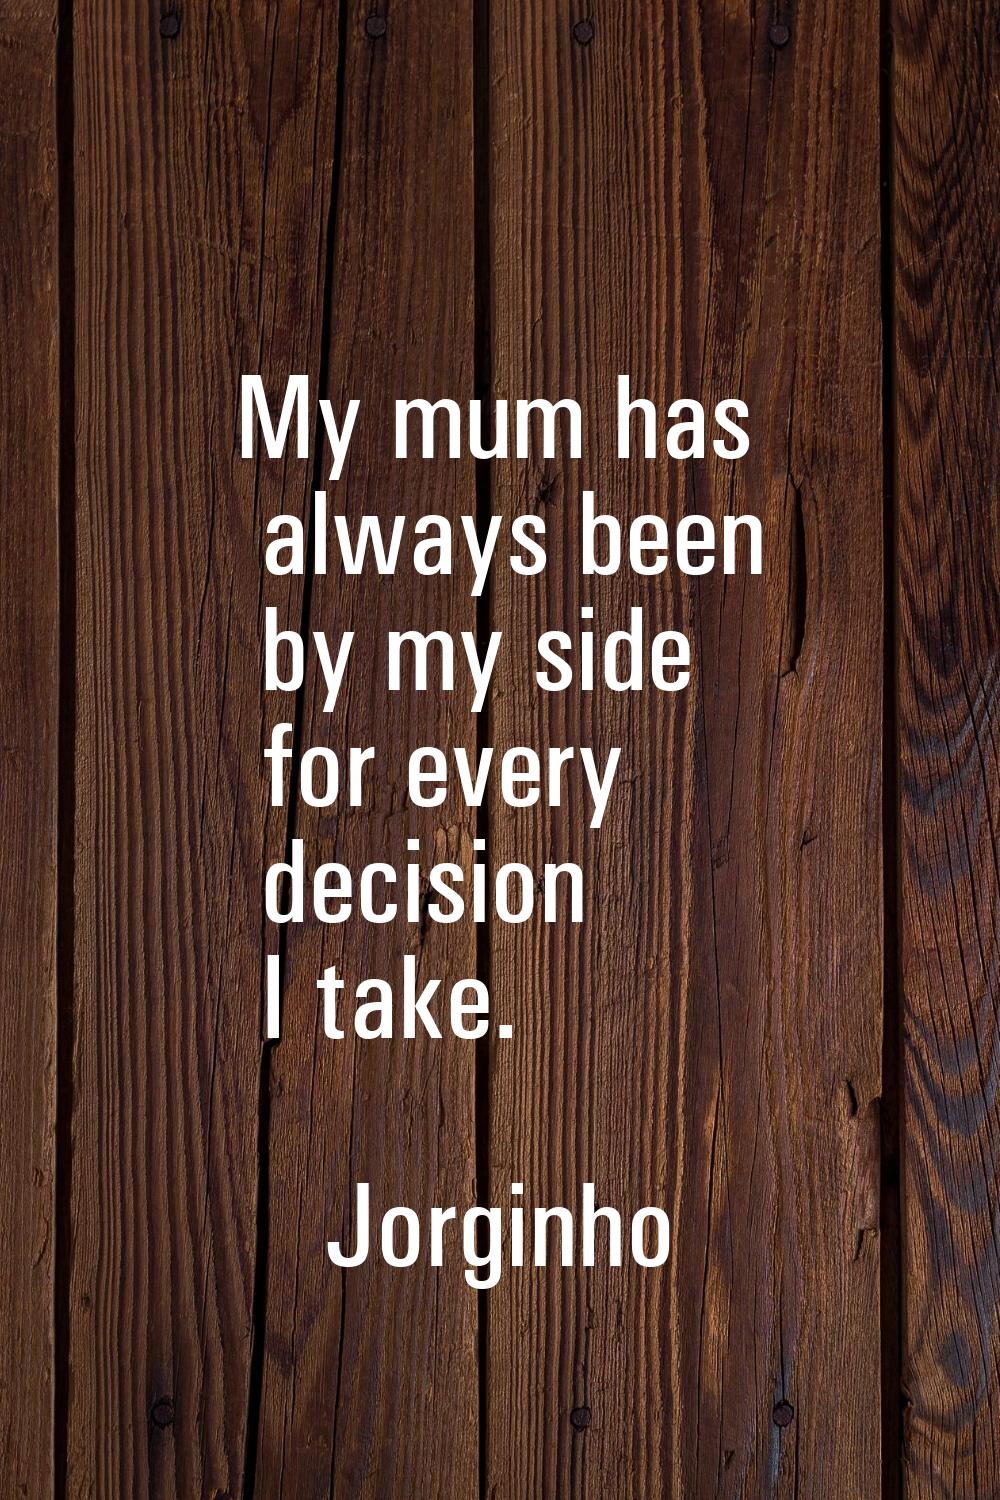 My mum has always been by my side for every decision I take.